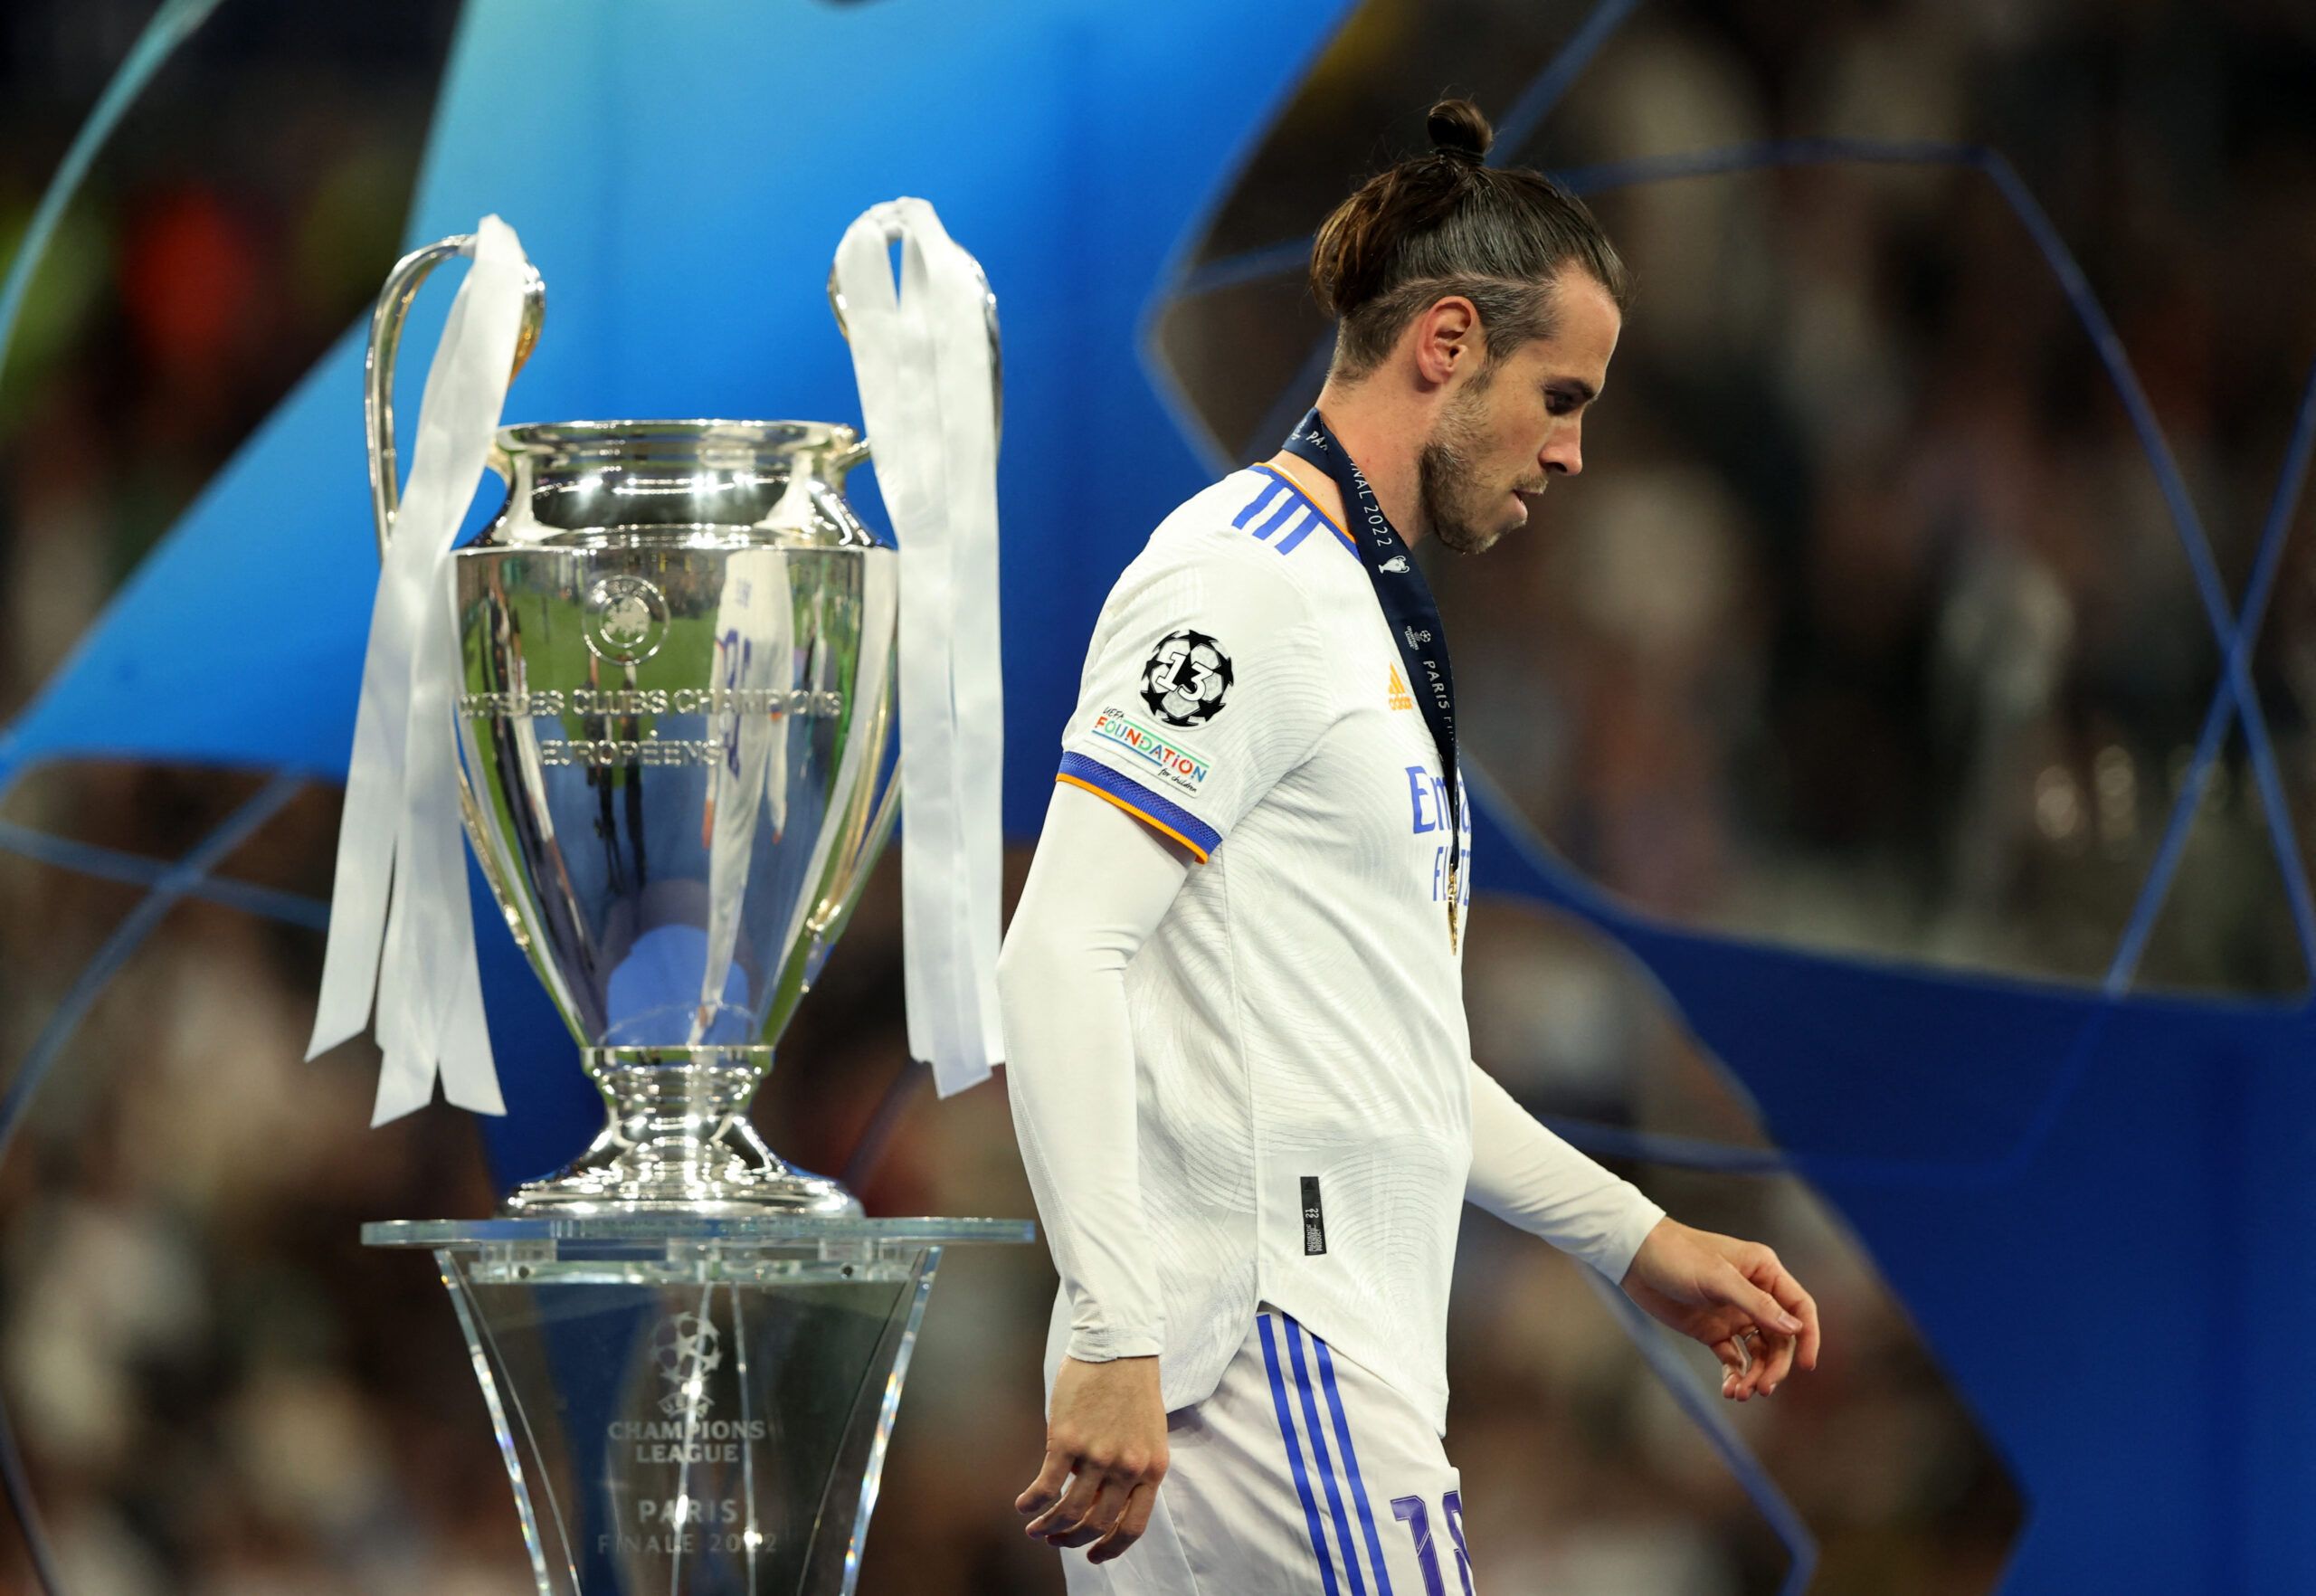 Soccer Football - Champions League Final - Liverpool v Real Madrid - Stade de France, Saint-Denis near Paris, France - May 28, 2022 Real Madrid's Gareth Bale walks past the champions league trophy before the presentation REUTERS/Molly Darlington